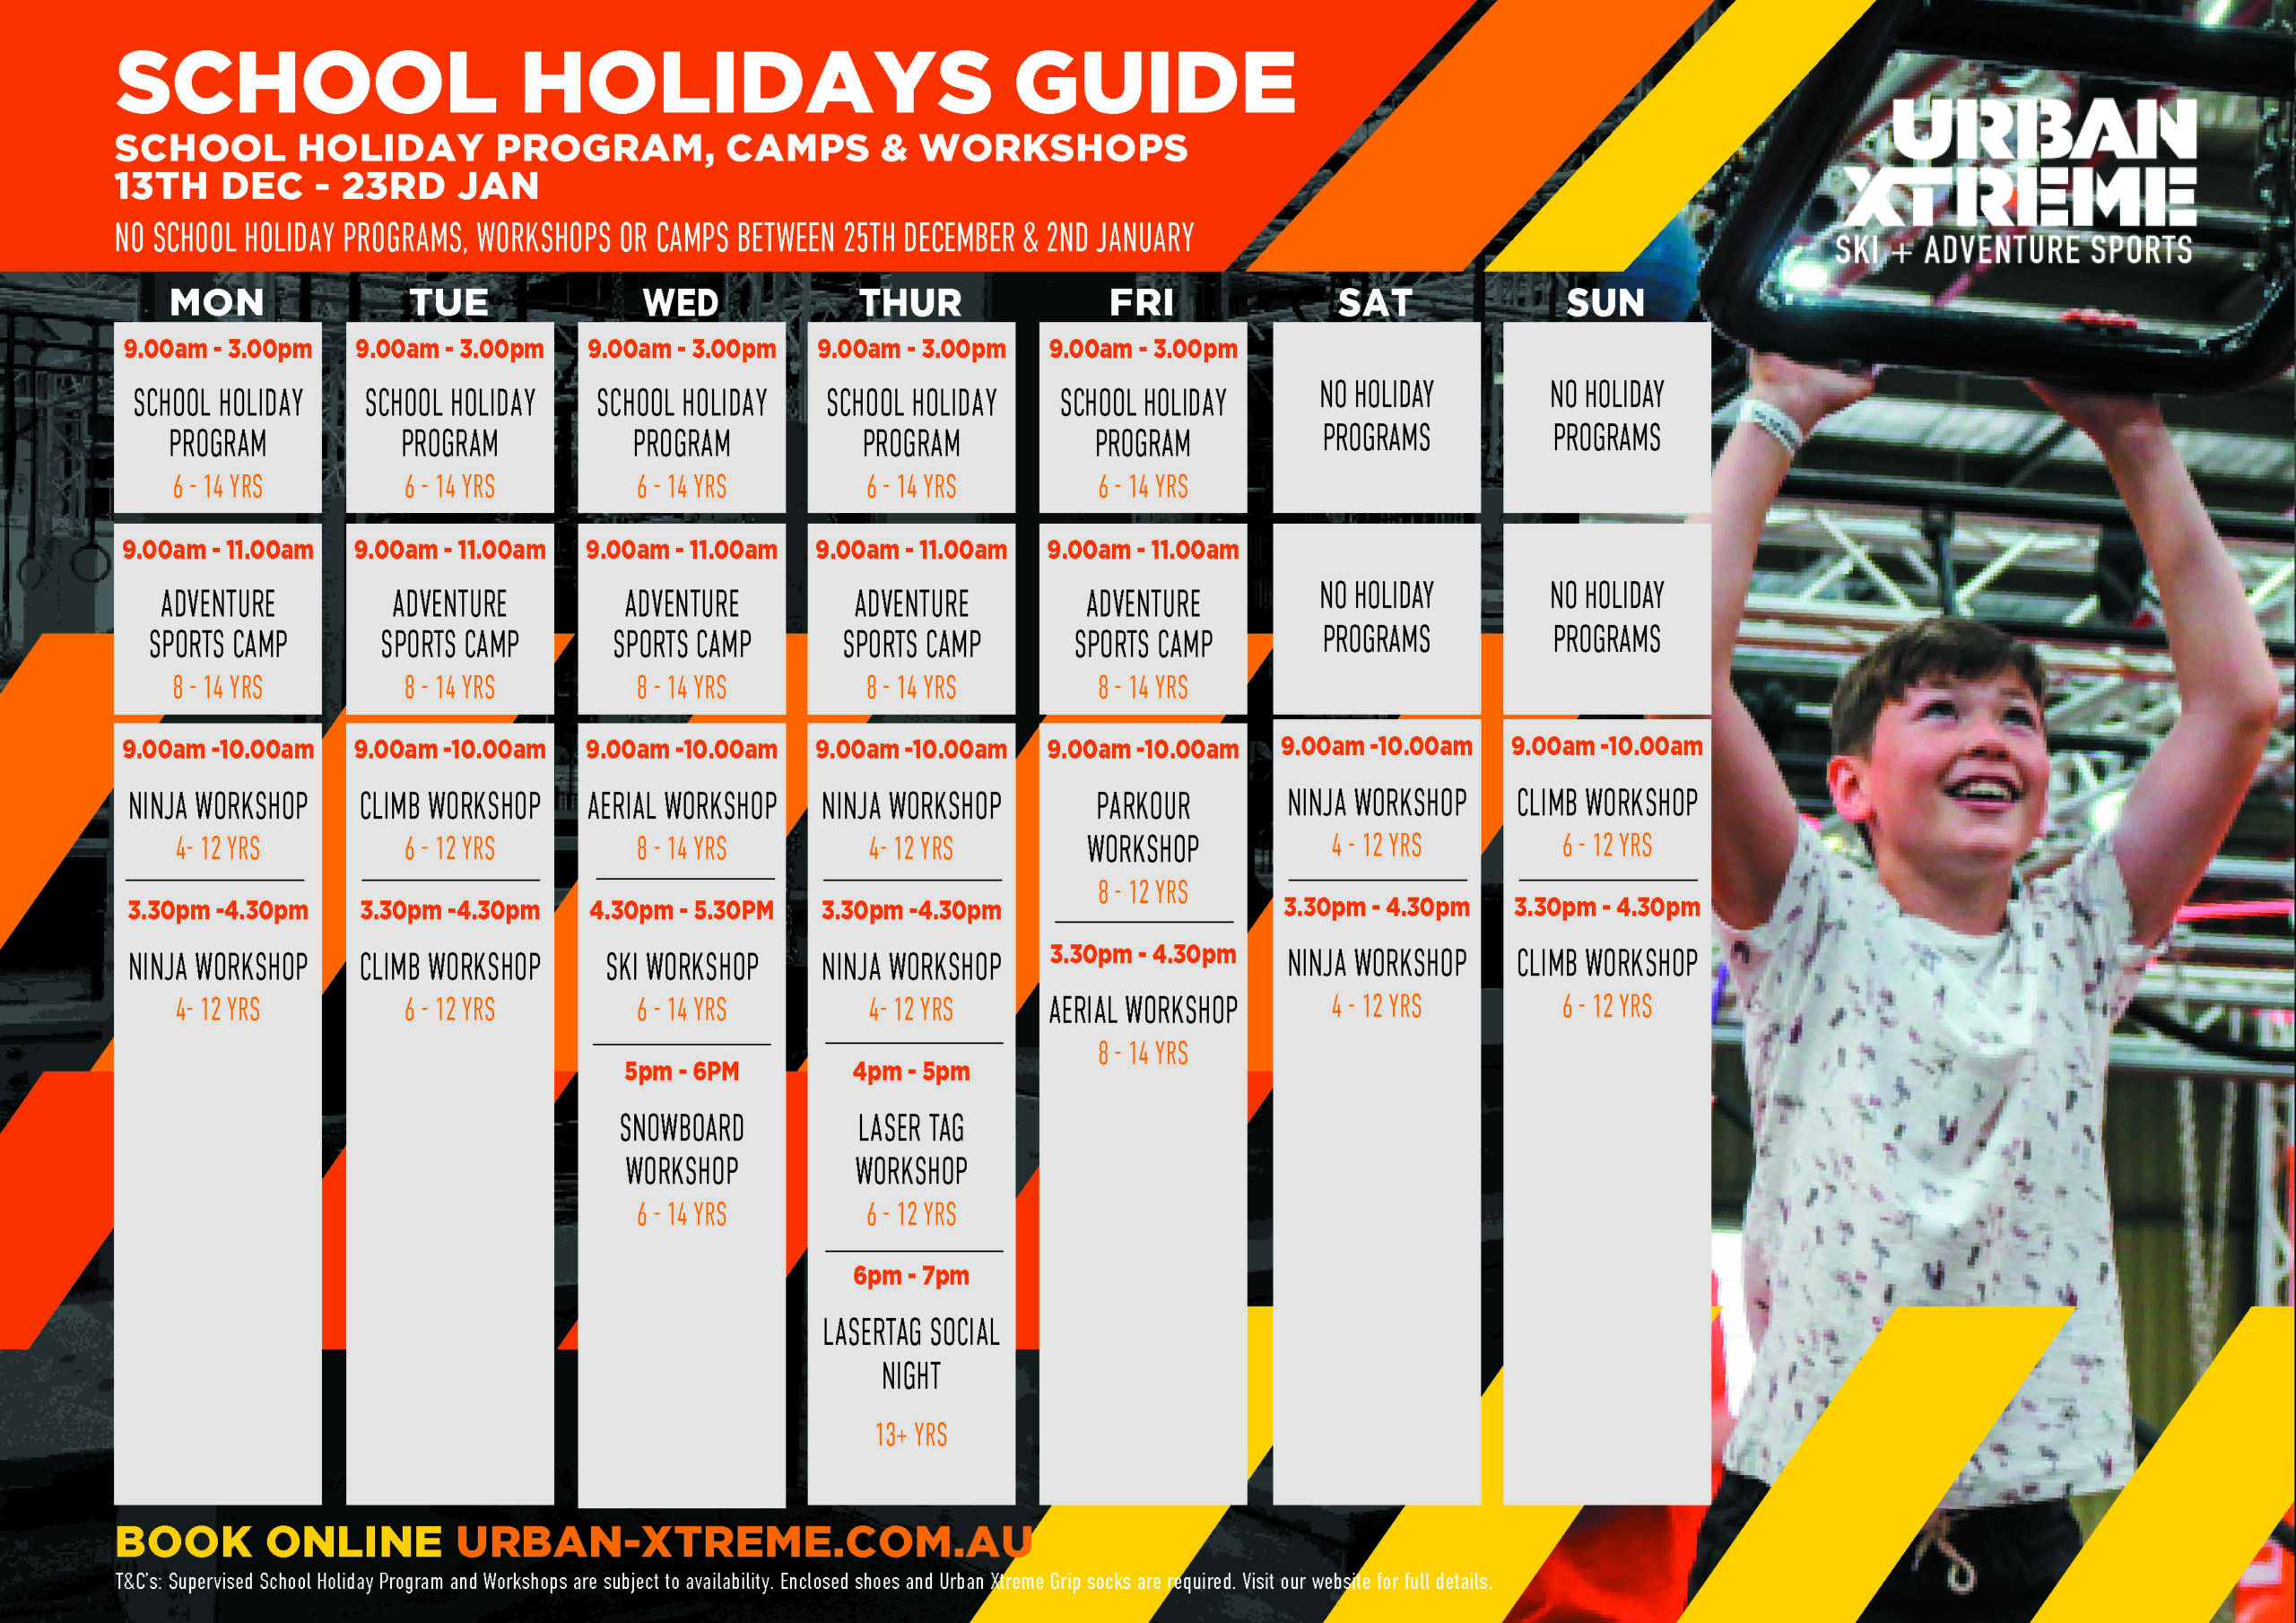 Browse the latest UX School Holiday Events Guide